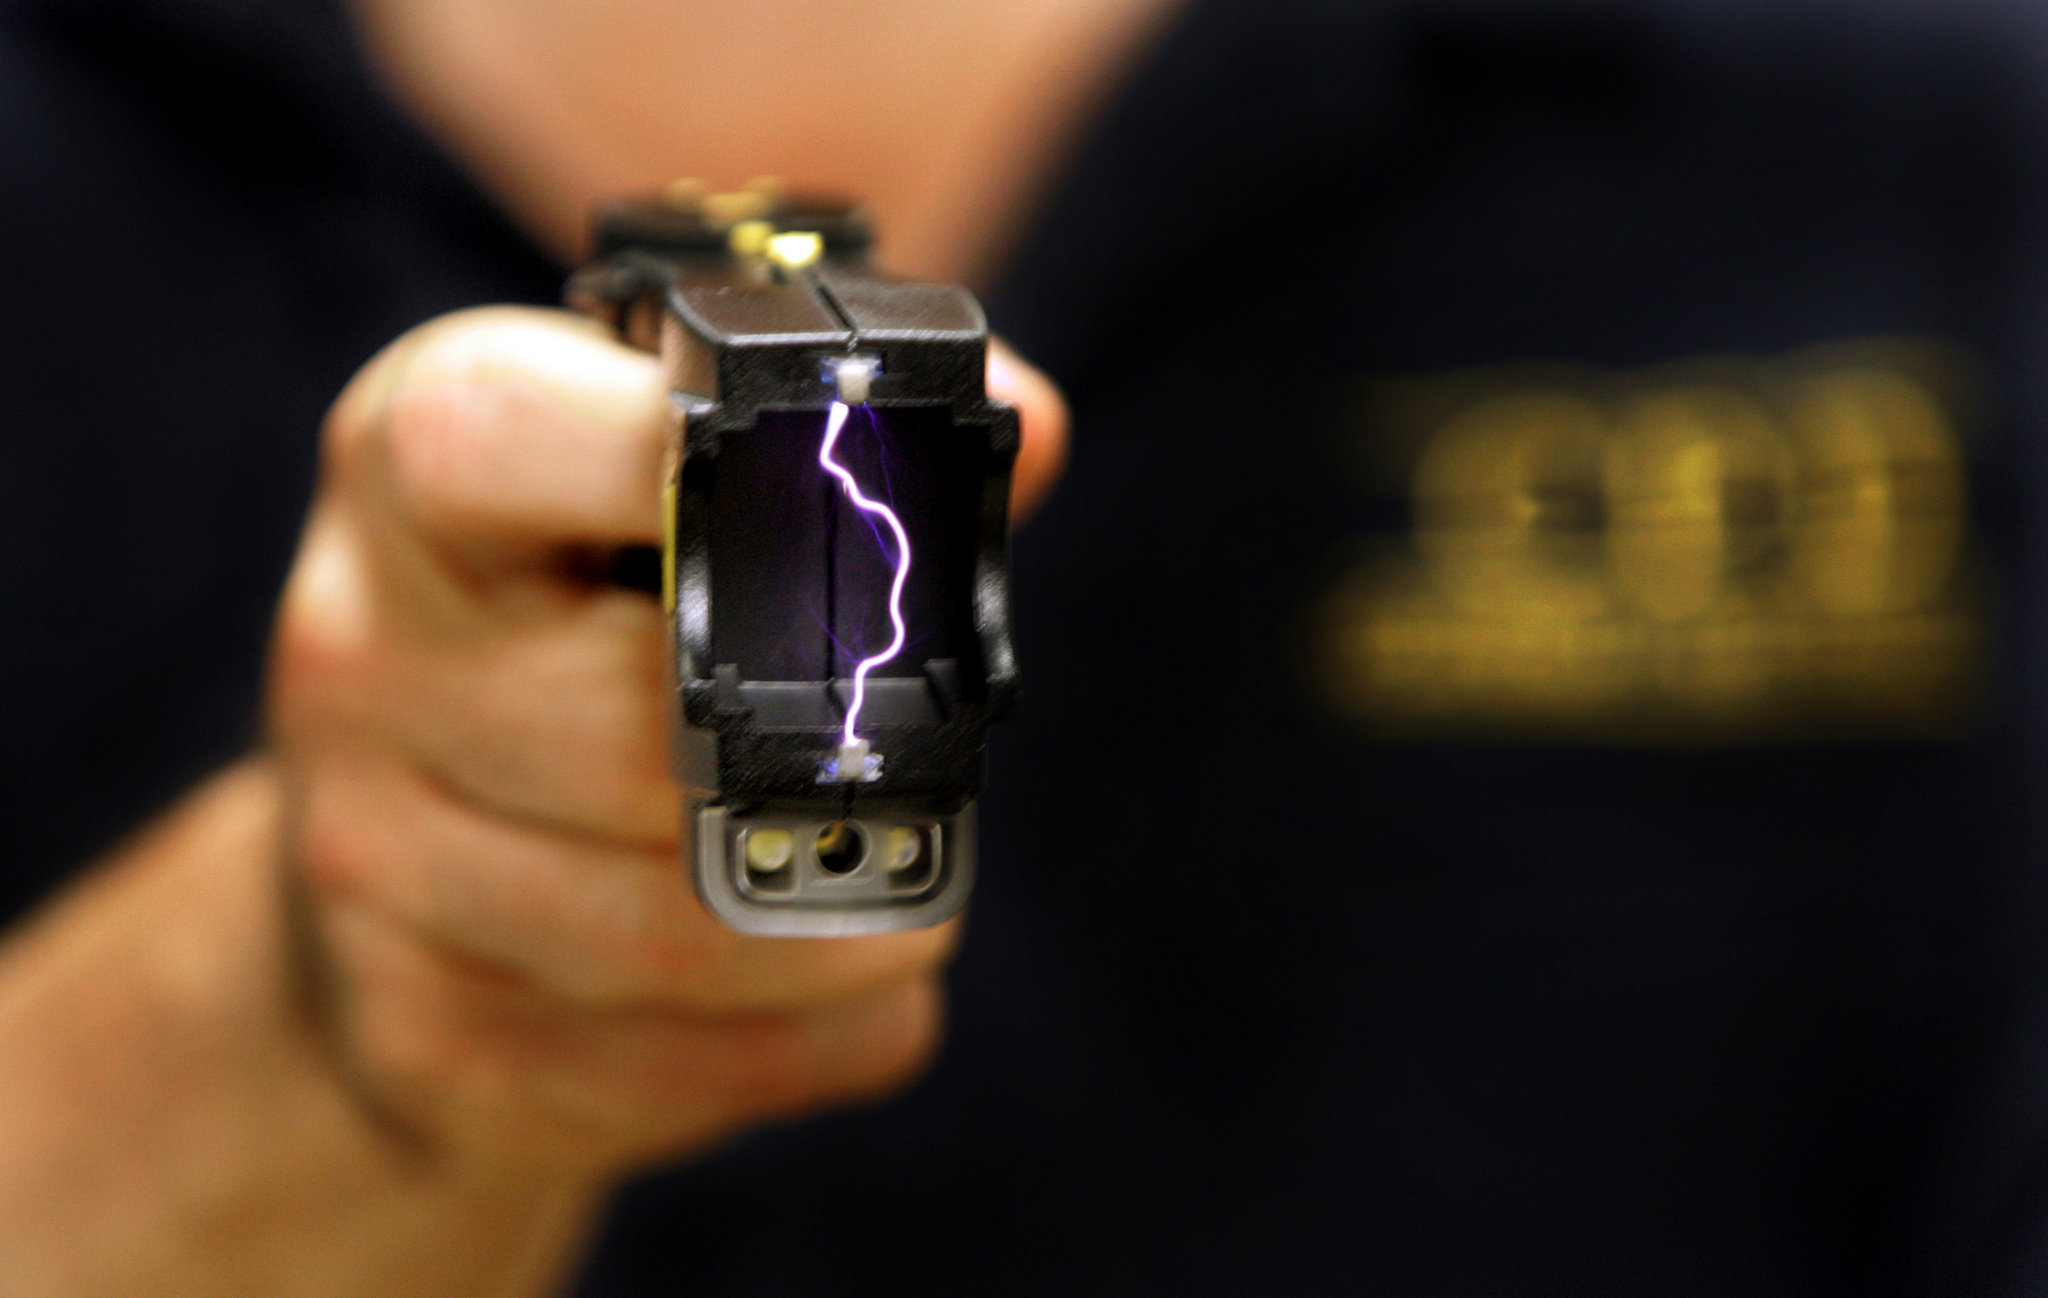 Cops Taser Woman for Buying too Many iPhones